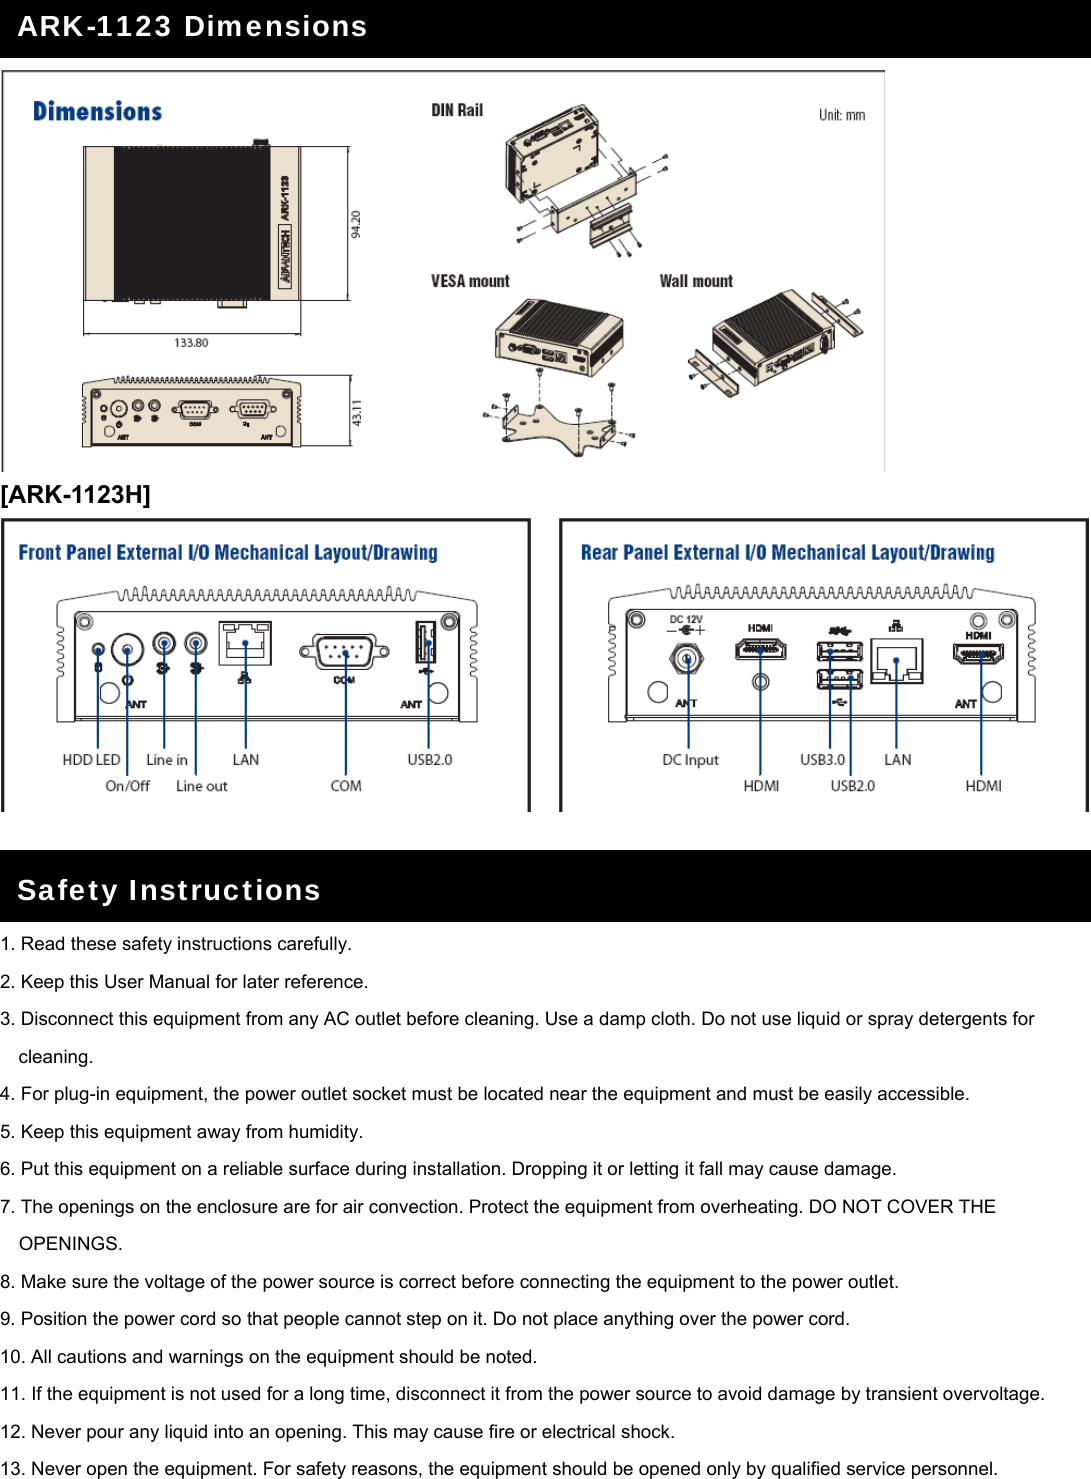     [ARK-1123H]     1. Read these safety instructions carefully. 2. Keep this User Manual for later reference. 3. Disconnect this equipment from any AC outlet before cleaning. Use a damp cloth. Do not use liquid or spray detergents for cleaning. 4. For plug-in equipment, the power outlet socket must be located near the equipment and must be easily accessible. 5. Keep this equipment away from humidity. 6. Put this equipment on a reliable surface during installation. Dropping it or letting it fall may cause damage. 7. The openings on the enclosure are for air convection. Protect the equipment from overheating. DO NOT COVER THE OPENINGS. 8. Make sure the voltage of the power source is correct before connecting the equipment to the power outlet. 9. Position the power cord so that people cannot step on it. Do not place anything over the power cord. 10. All cautions and warnings on the equipment should be noted. 11. If the equipment is not used for a long time, disconnect it from the power source to avoid damage by transient overvoltage. 12. Never pour any liquid into an opening. This may cause fire or electrical shock. 13. Never open the equipment. For safety reasons, the equipment should be opened only by qualified service personnel. ARK-1123 Dimensions Safety Instructions 